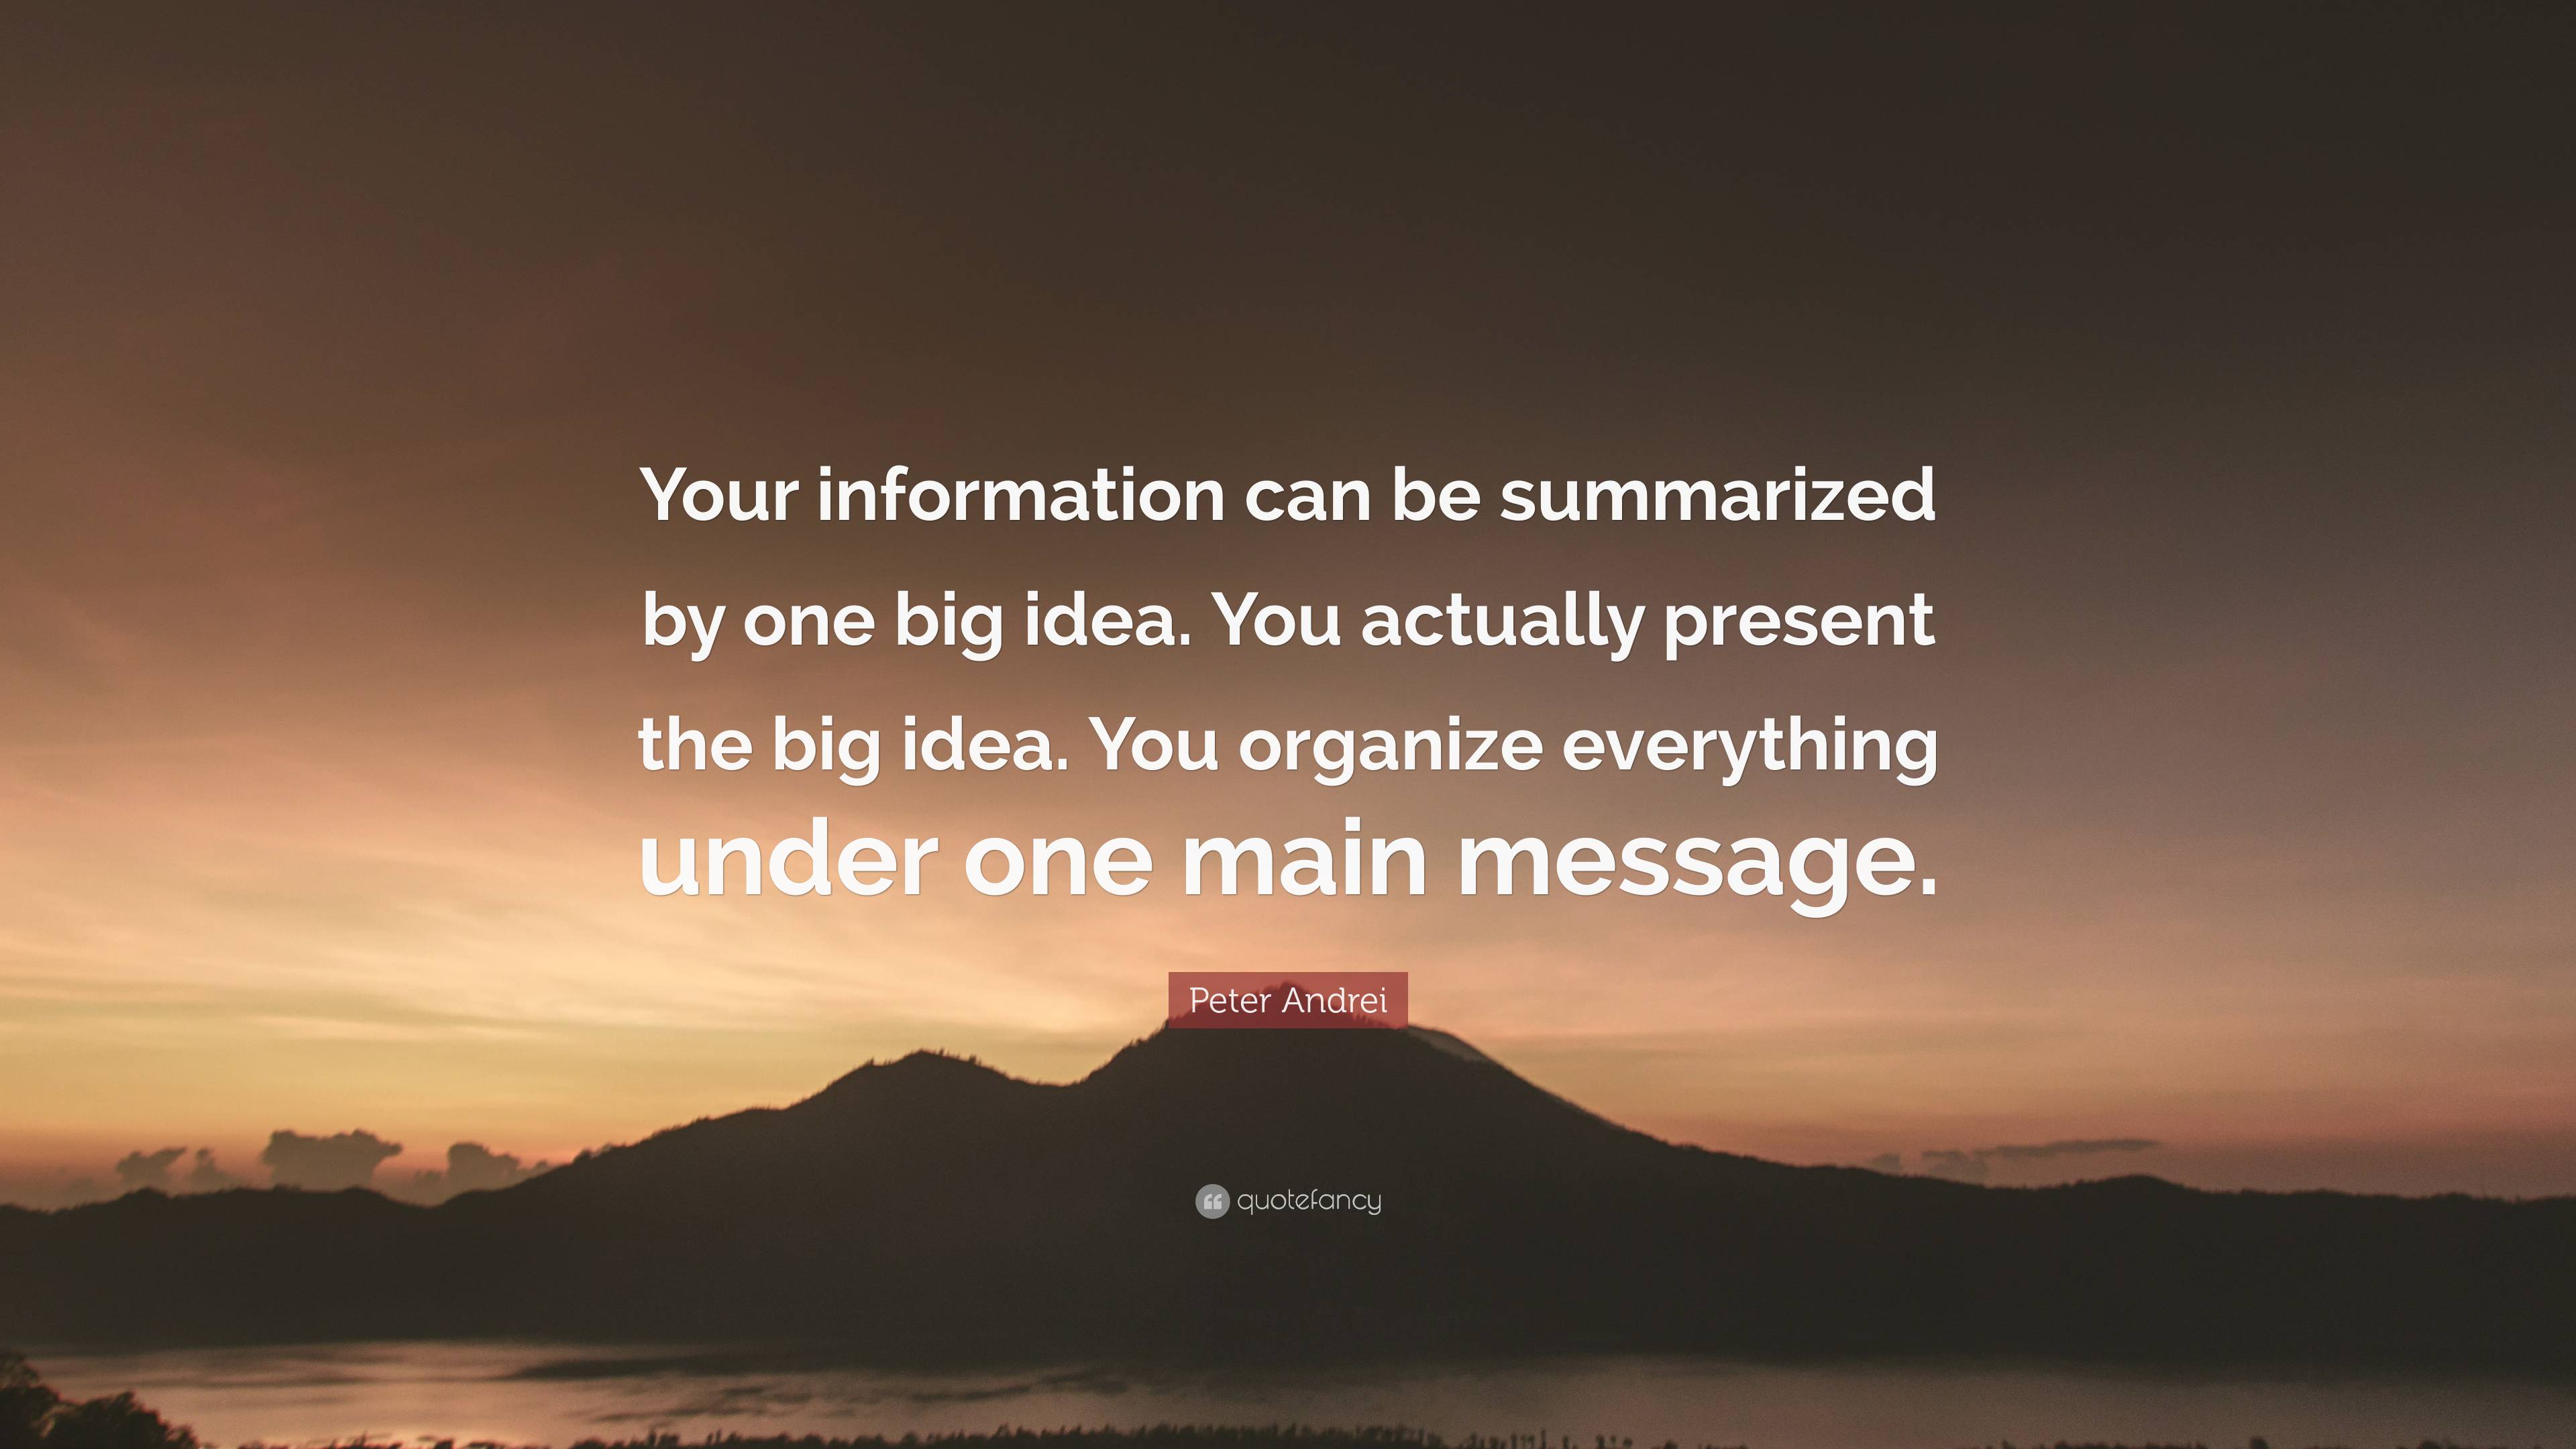 Peter Andrei Quote: “Your information can be summarized by one big idea ...